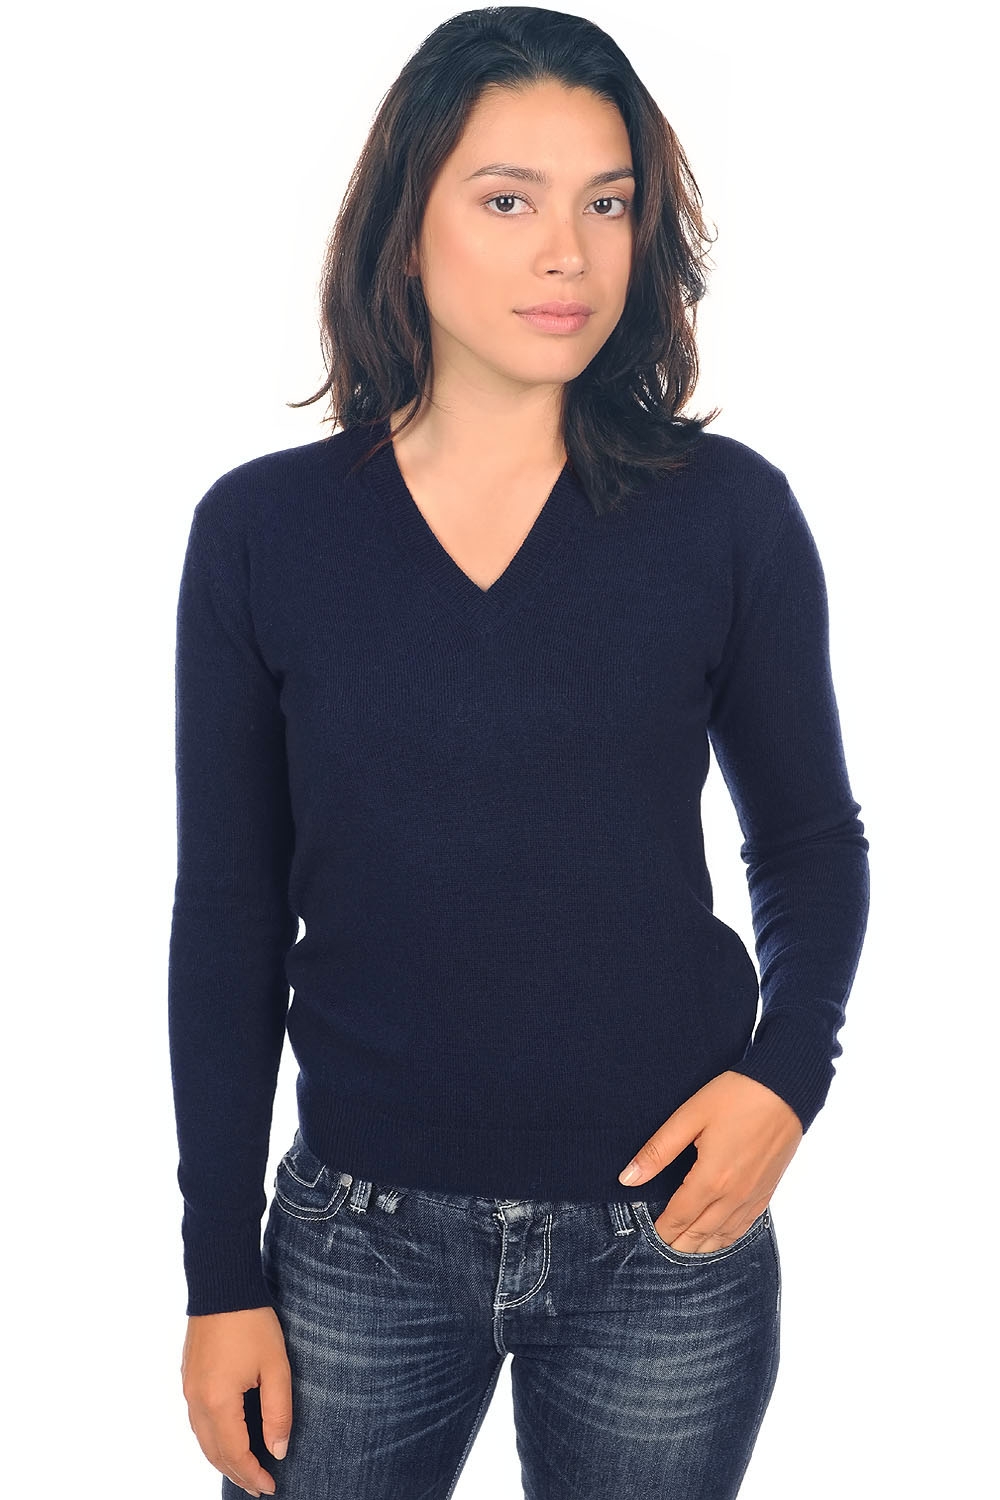 Cashmere ladies basic sweaters at low prices tessa first dress blue xs